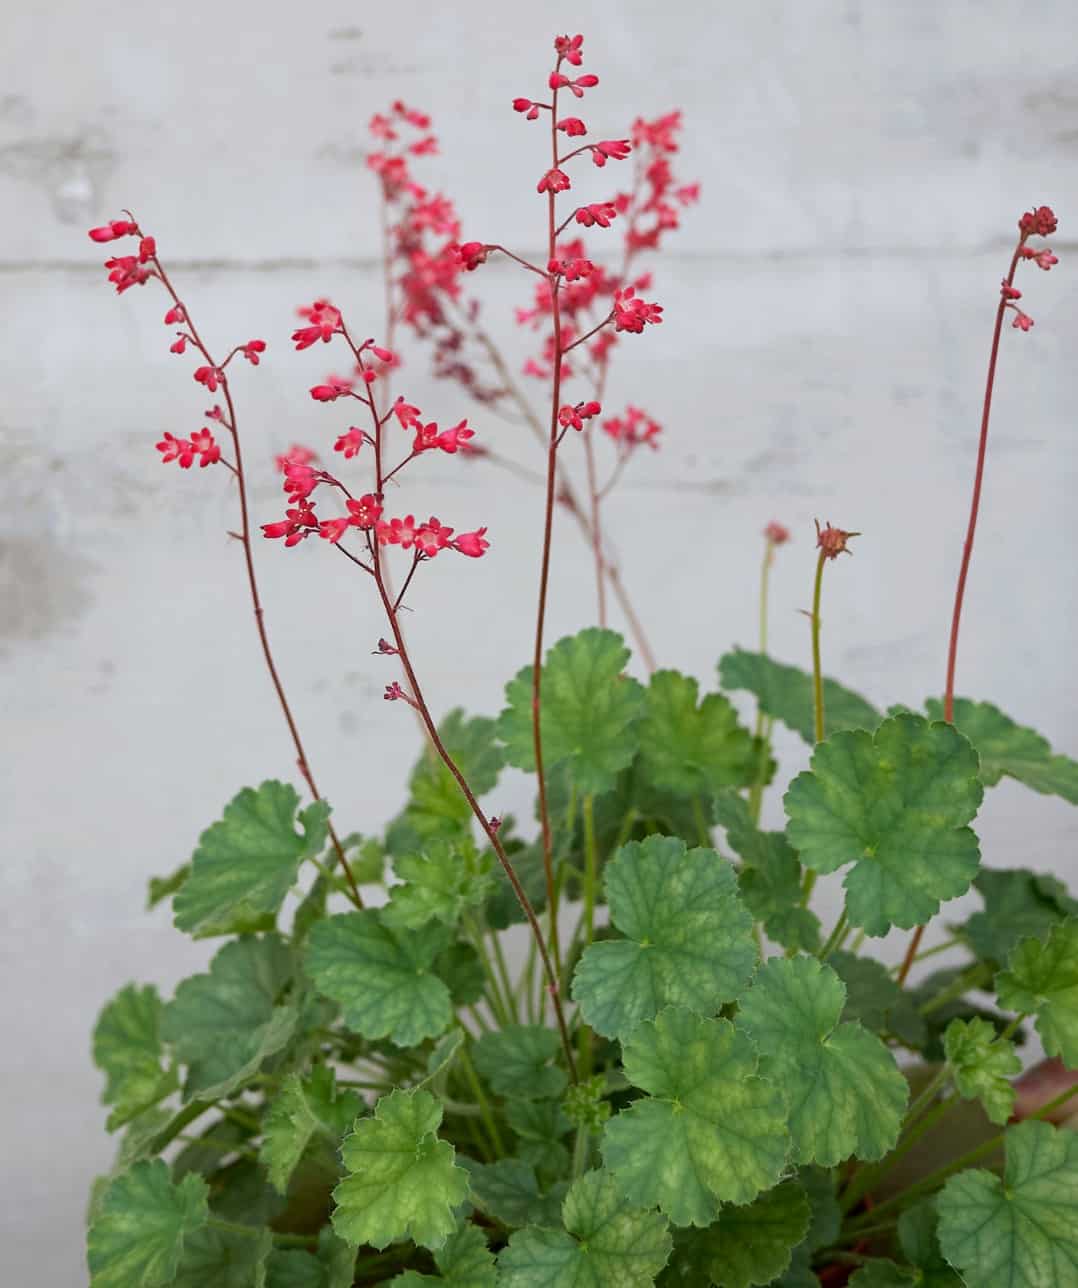 coral bells is known for its beautiful foliage